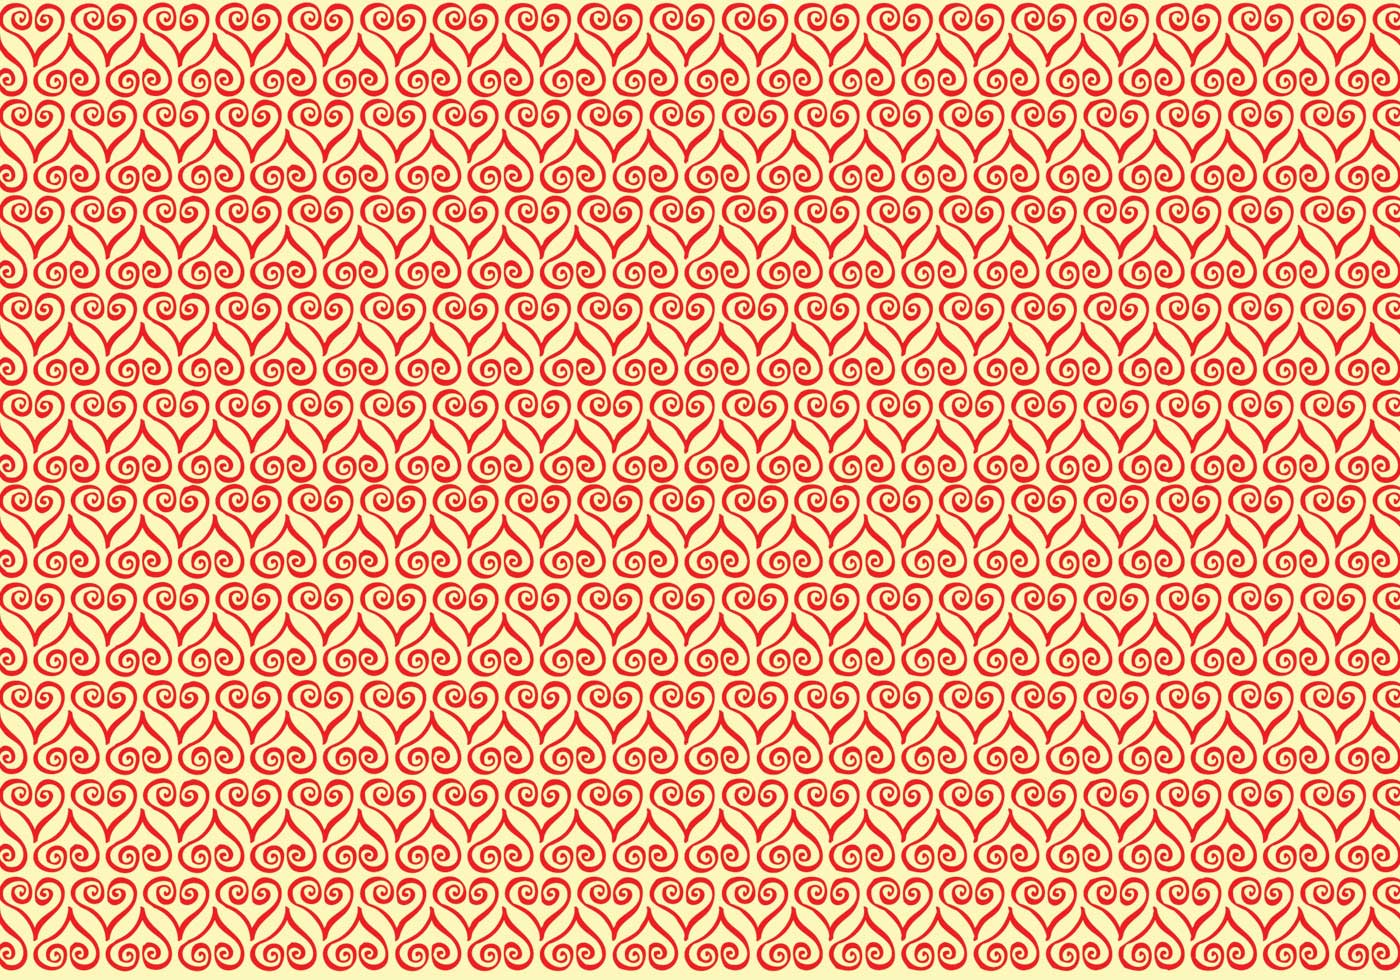 Tiny heart pattern powerpoint background 